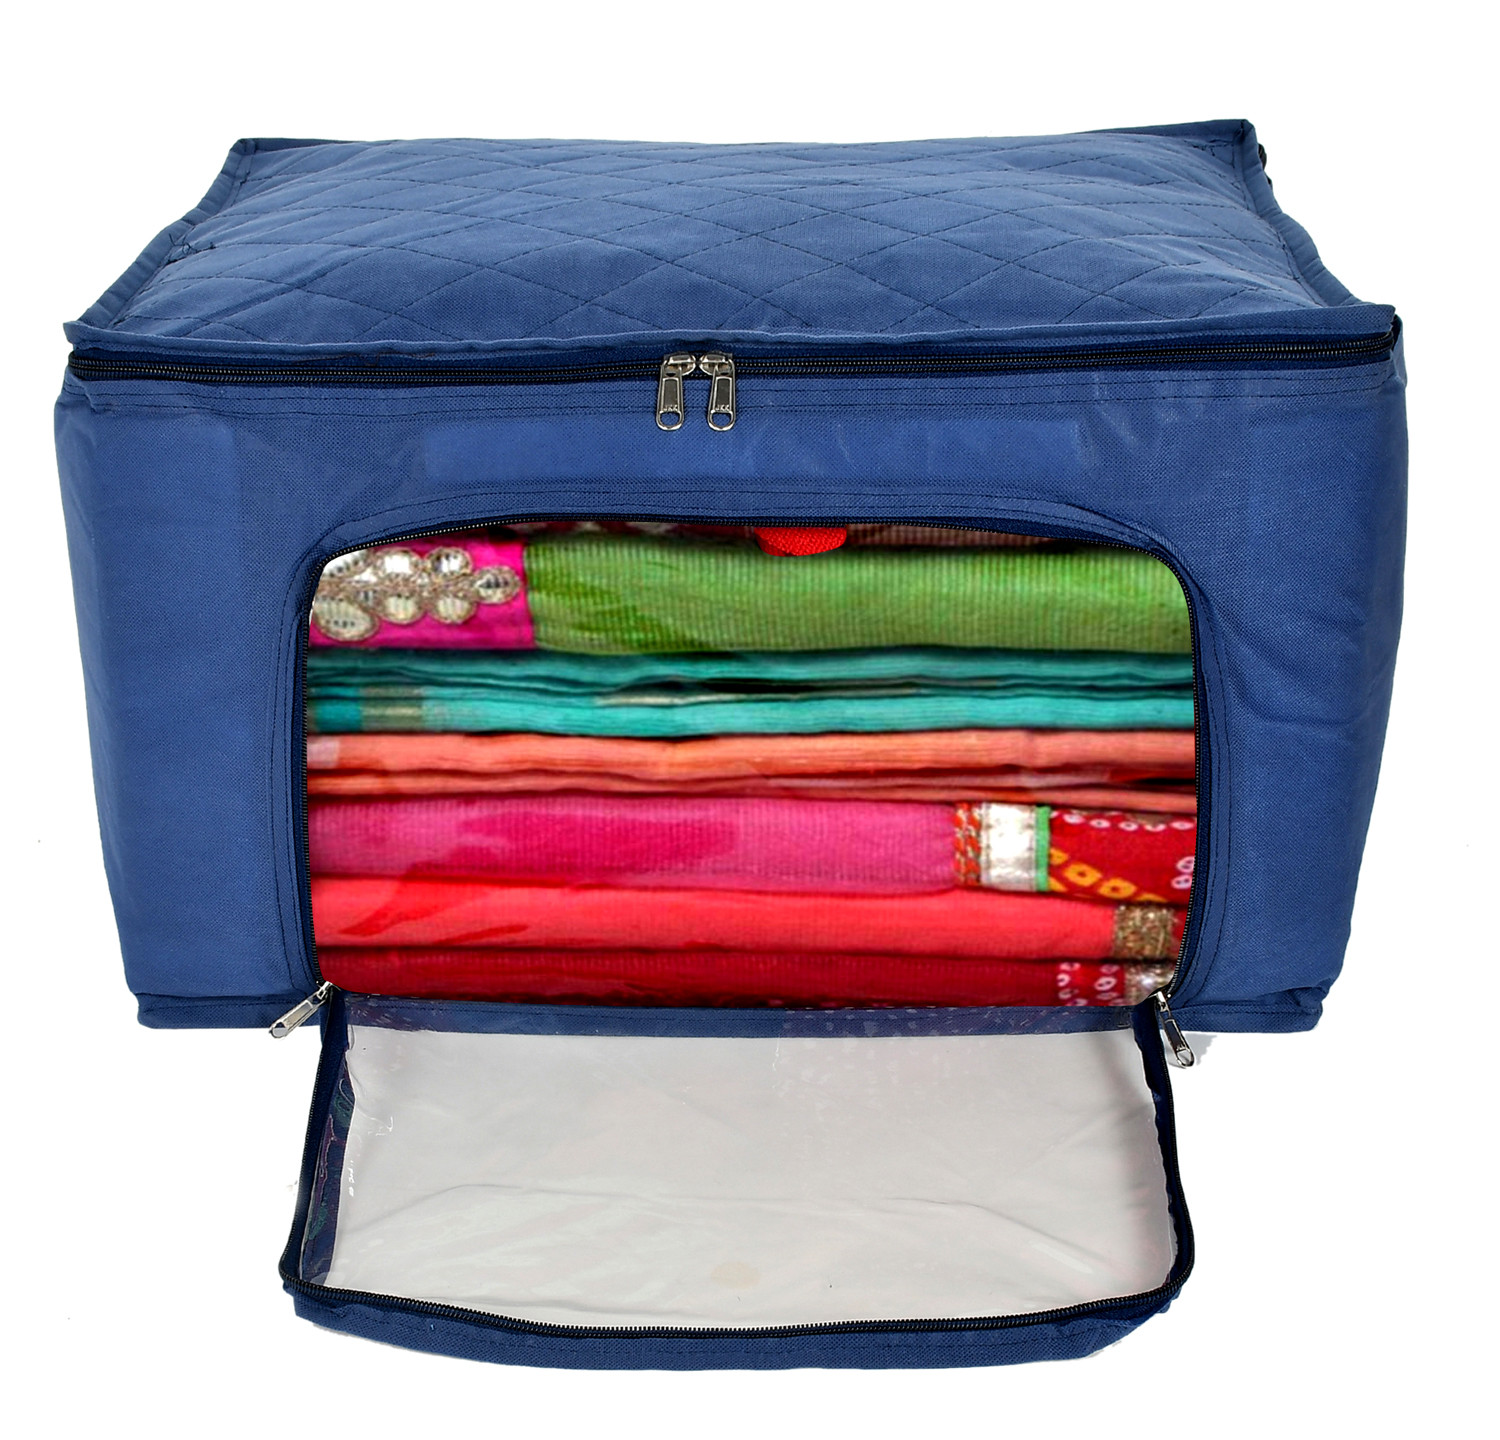 Kuber Industries Clothing Storage Bags, Under Bed Foldable Organizer, Store Blankets, Clothes With Zipper Tranasparent Window, 66 Litre (Navy Blue)-HS_38_KUBMART21293